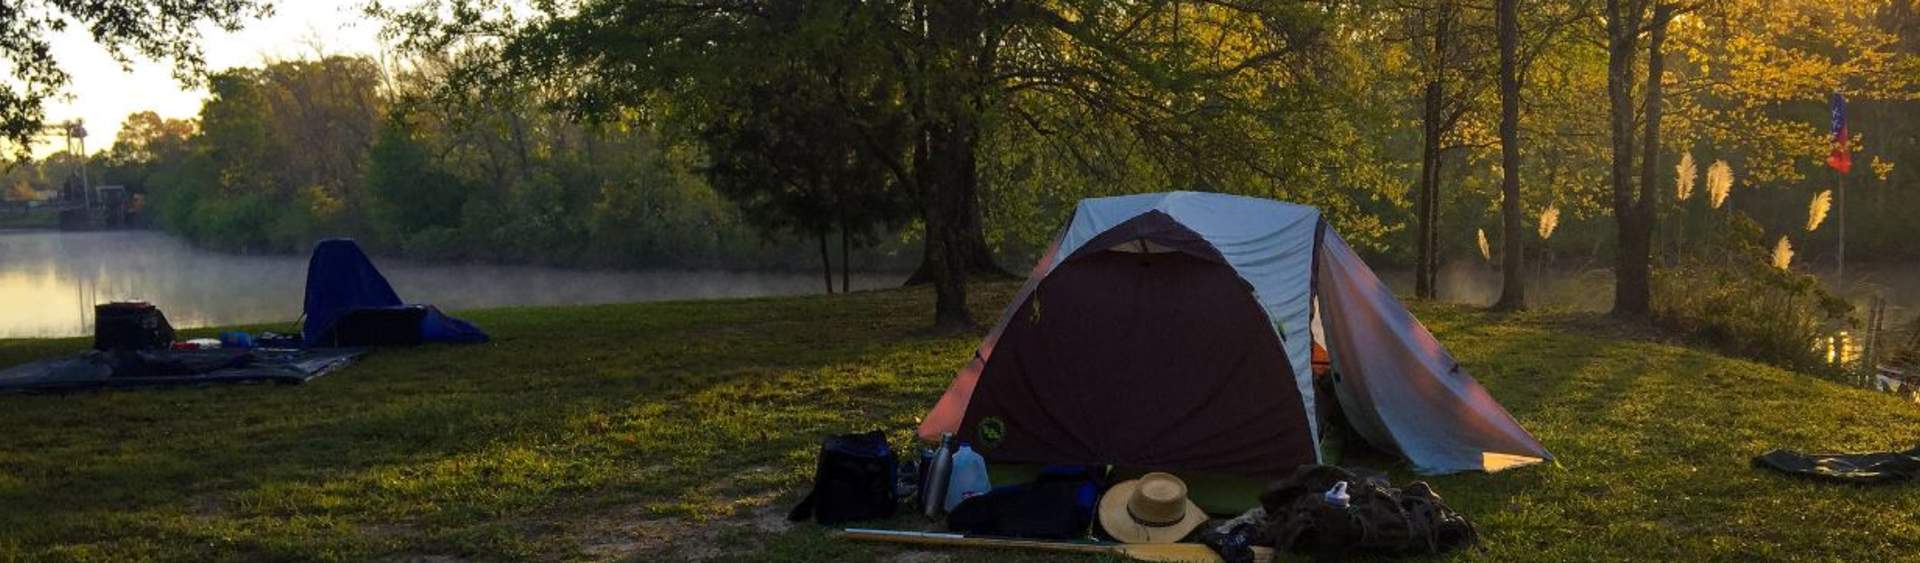 Top 5 Places to Camp in Acadiana